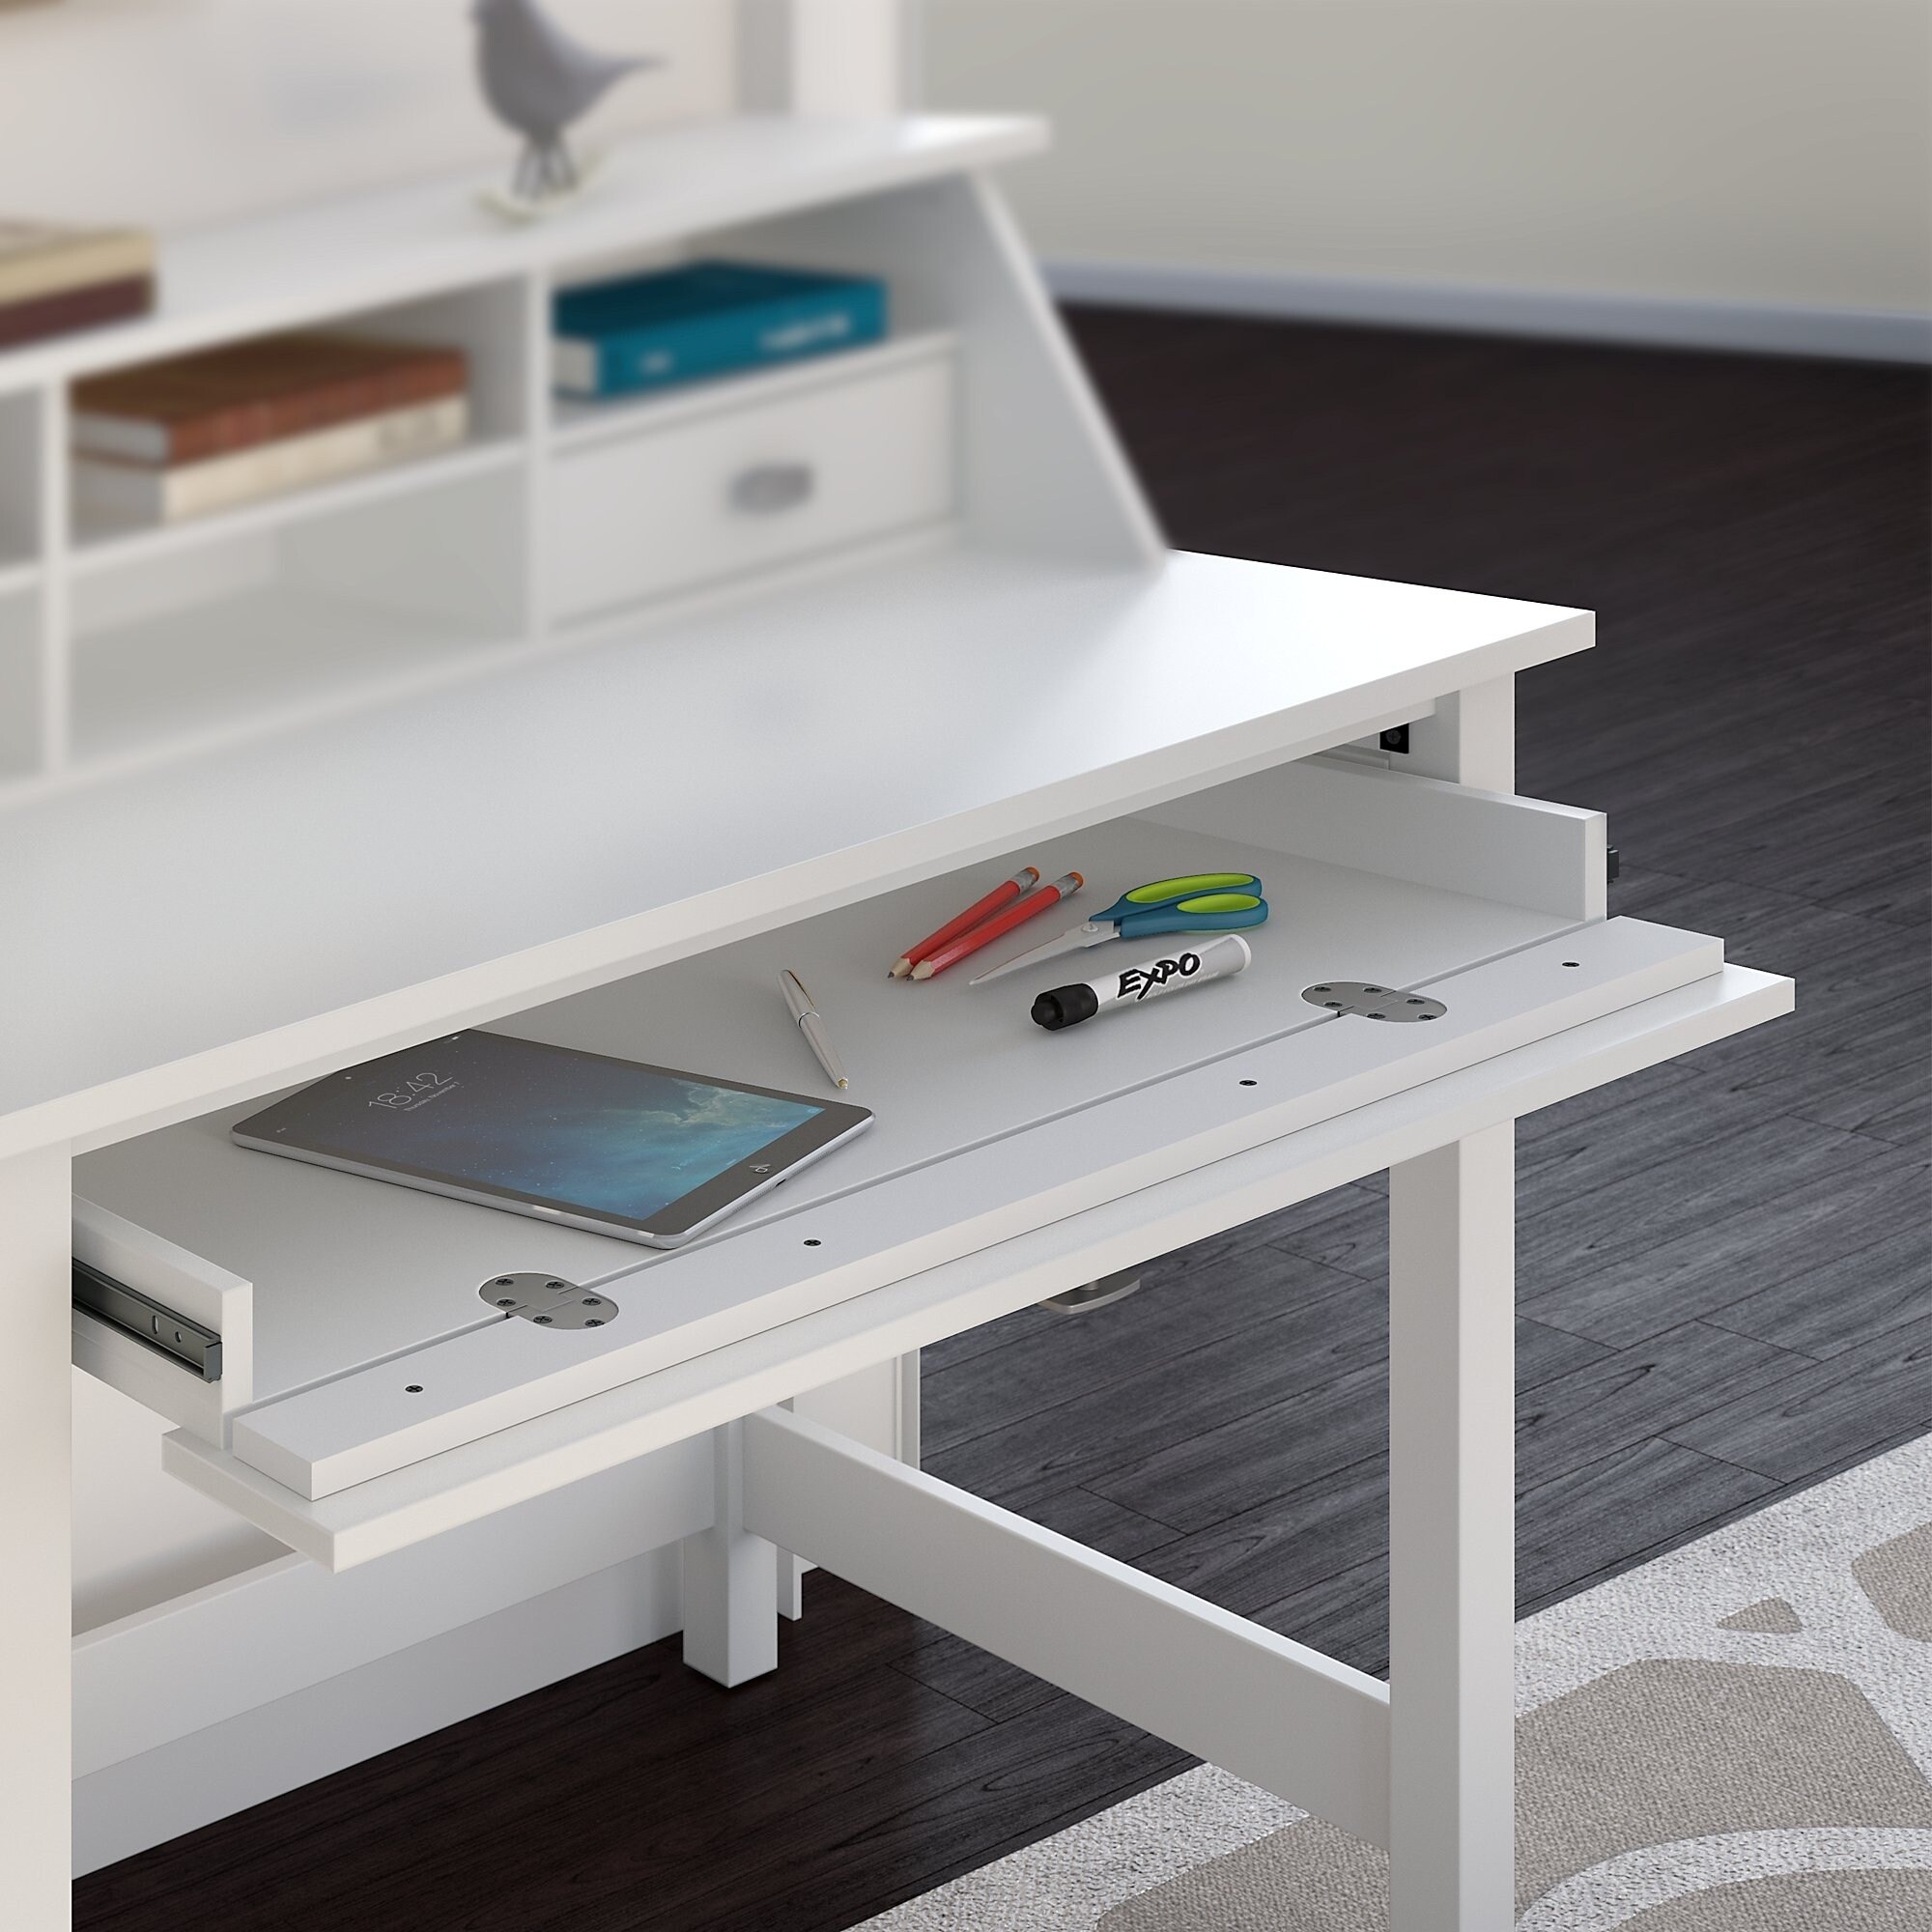 https://ak1.ostkcdn.com/images/products/12796704/Bush-Furniture-Broadview-Computer-Desk-with-Drawers-in-Pure-White-9cd4d5dc-8aca-45ab-b8a1-fa1f46ad17f6.jpg